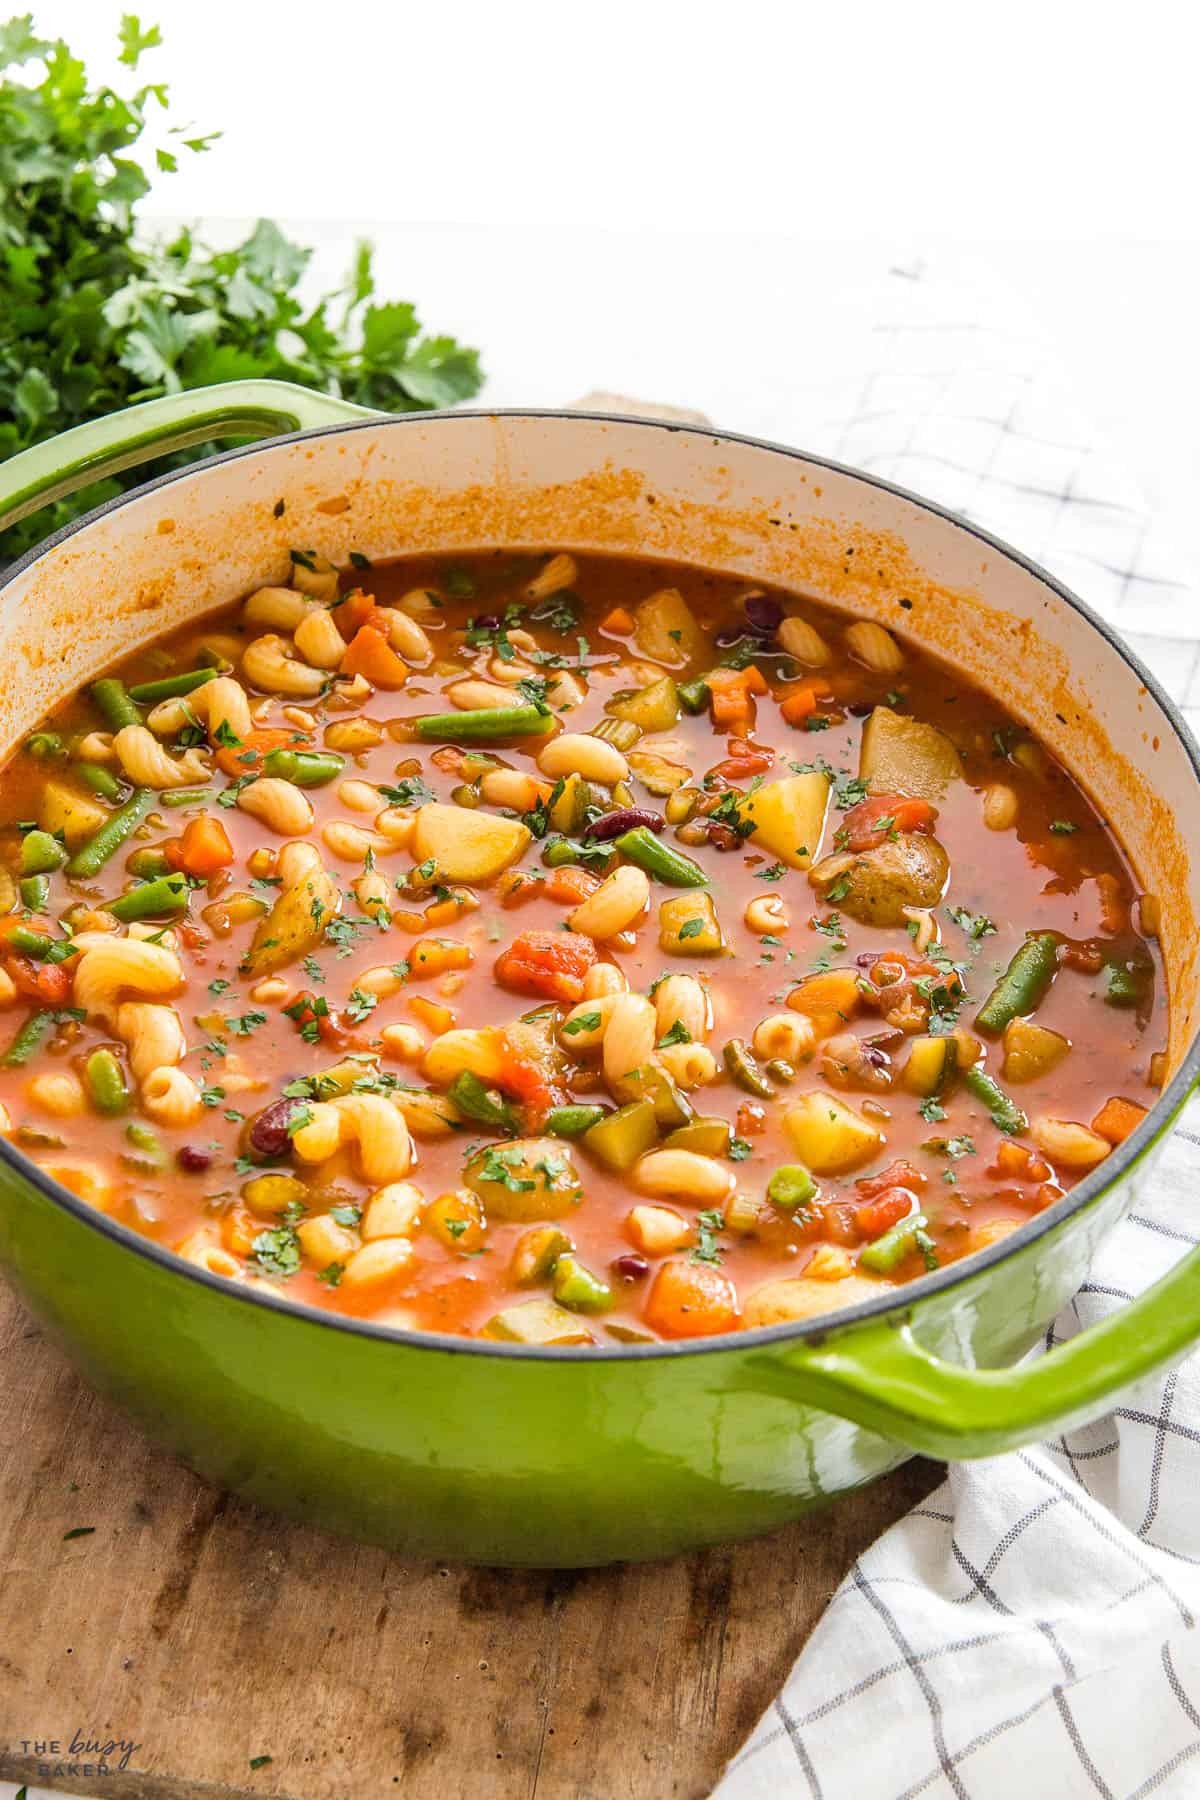 Italian vegetable stew with noodles, potatoes and beans